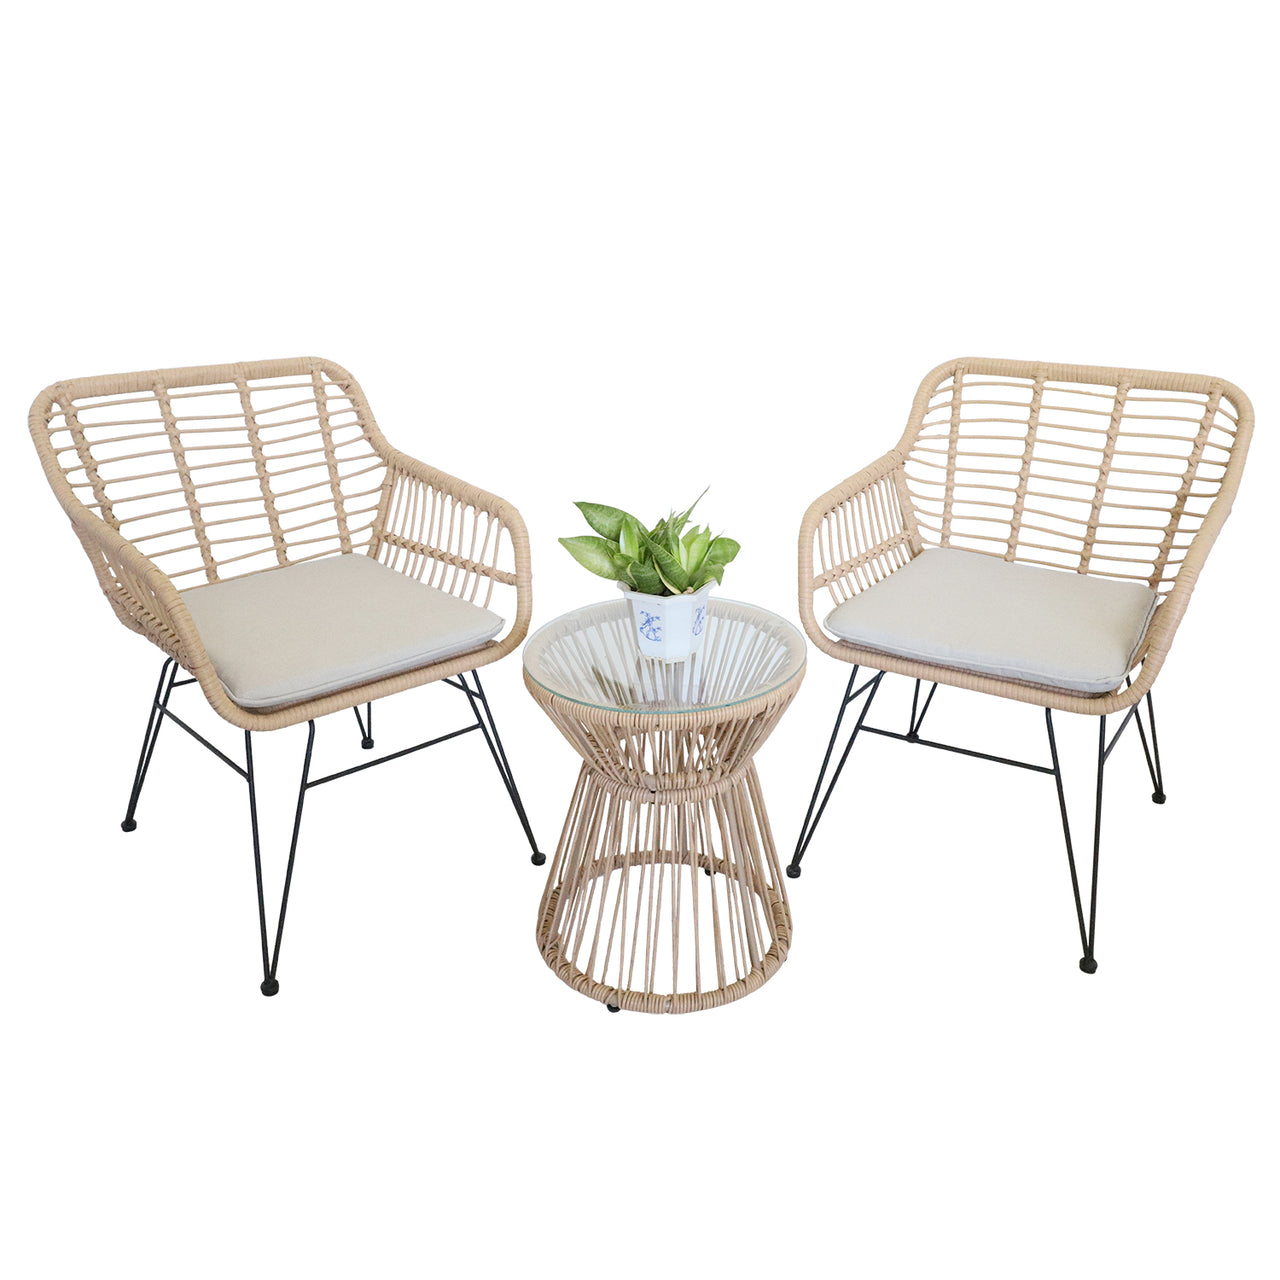 Balcony Furniture, 3 Piece Patio Set, Outdoor Wicker Chairs with Glass Top Table and Soft Cushion, Rattan Front Porch Furniture